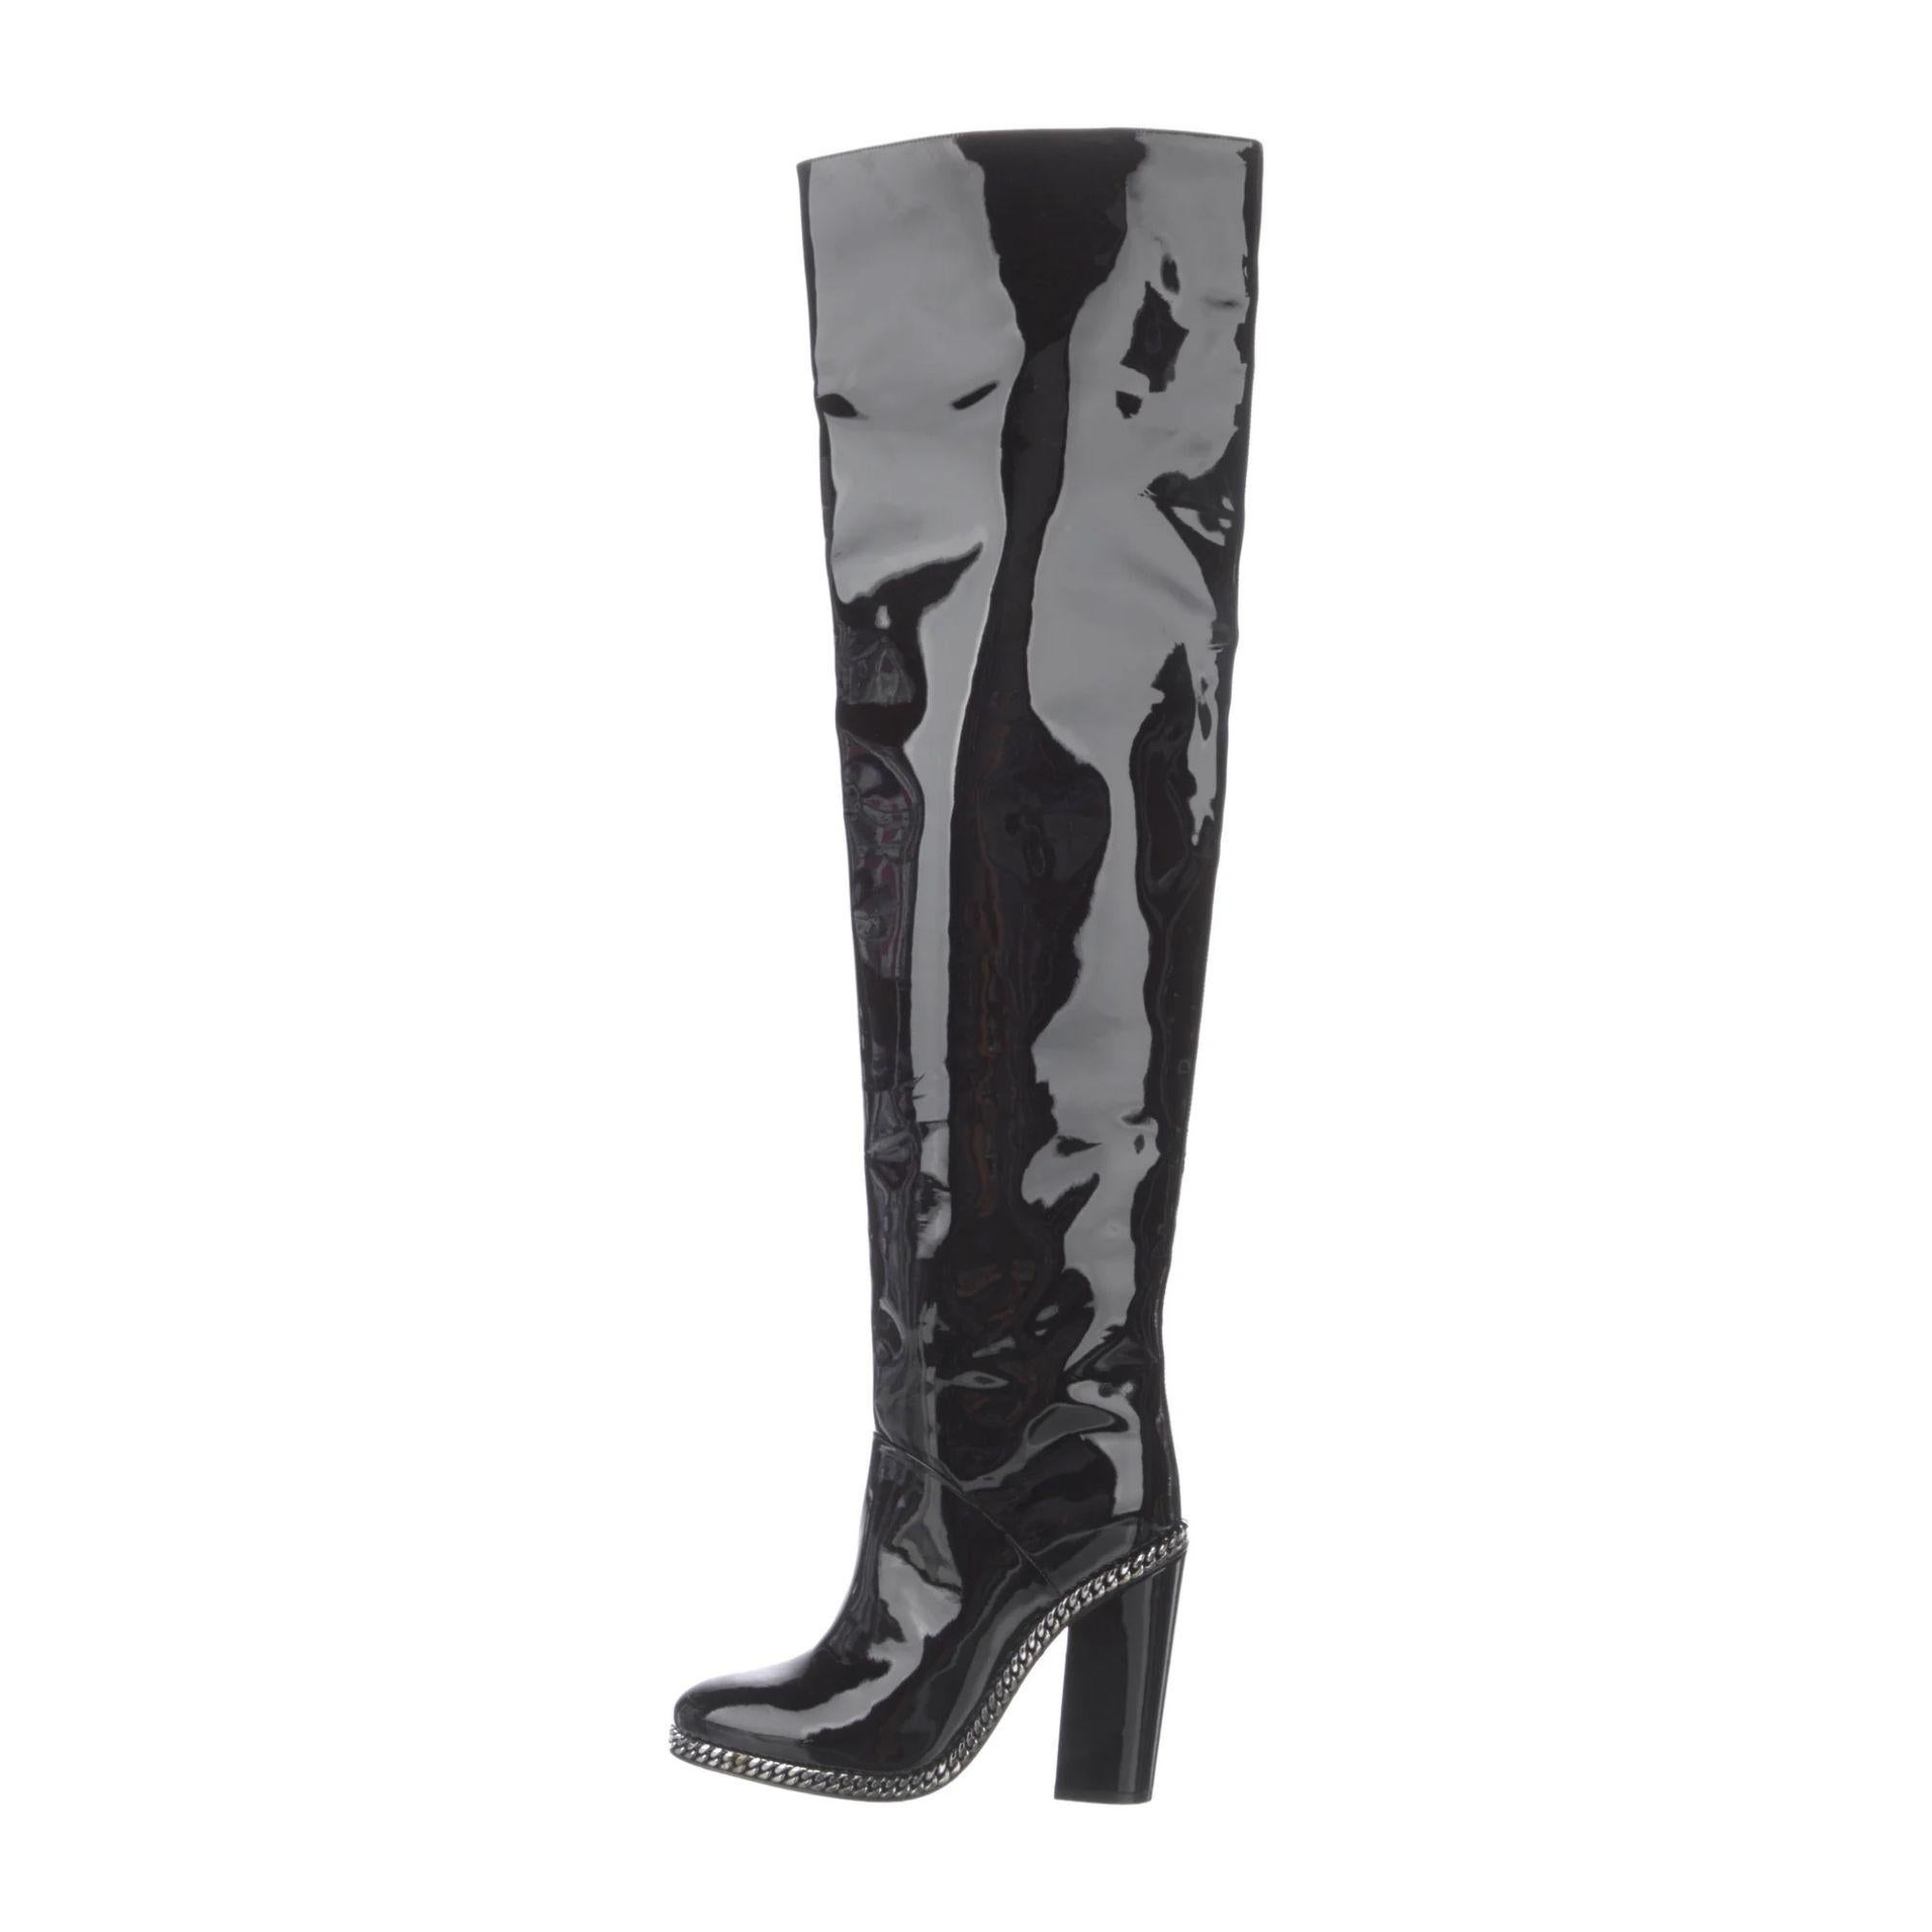 Gucci Black Patent Leather Thigh High Tall Boots Size 8/38.5